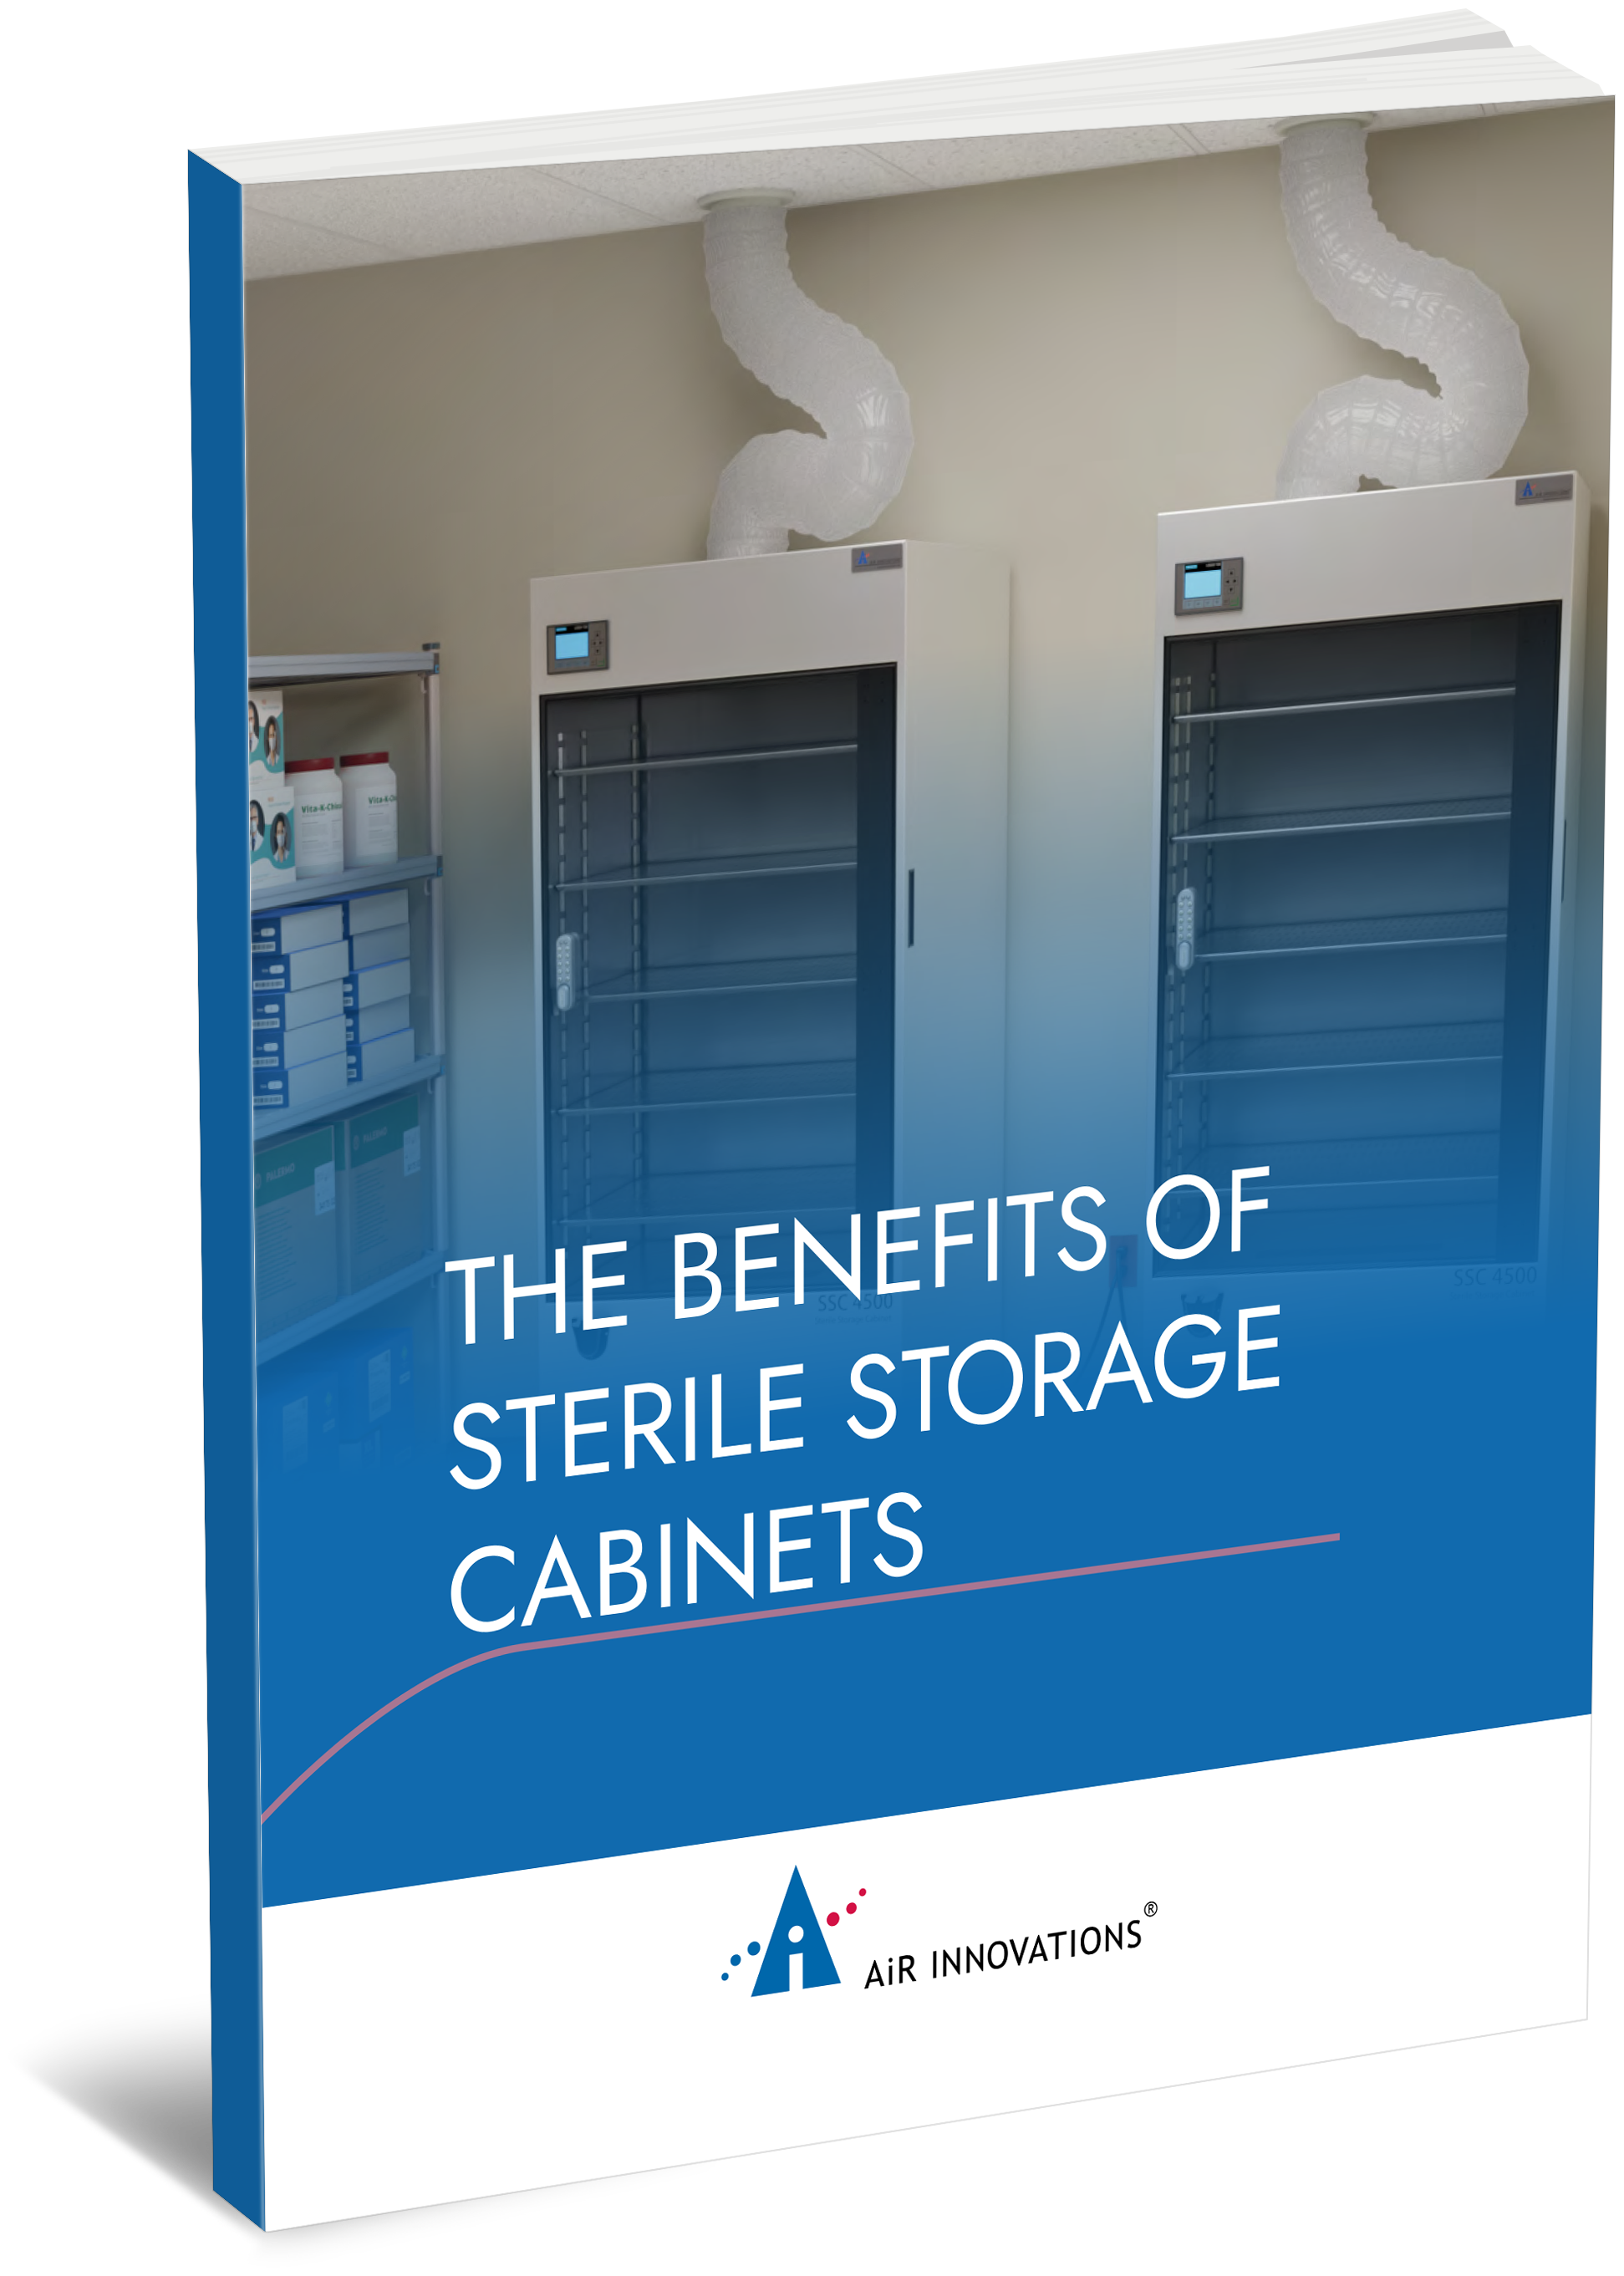 The Benefits of Sterile Storage Cabinets